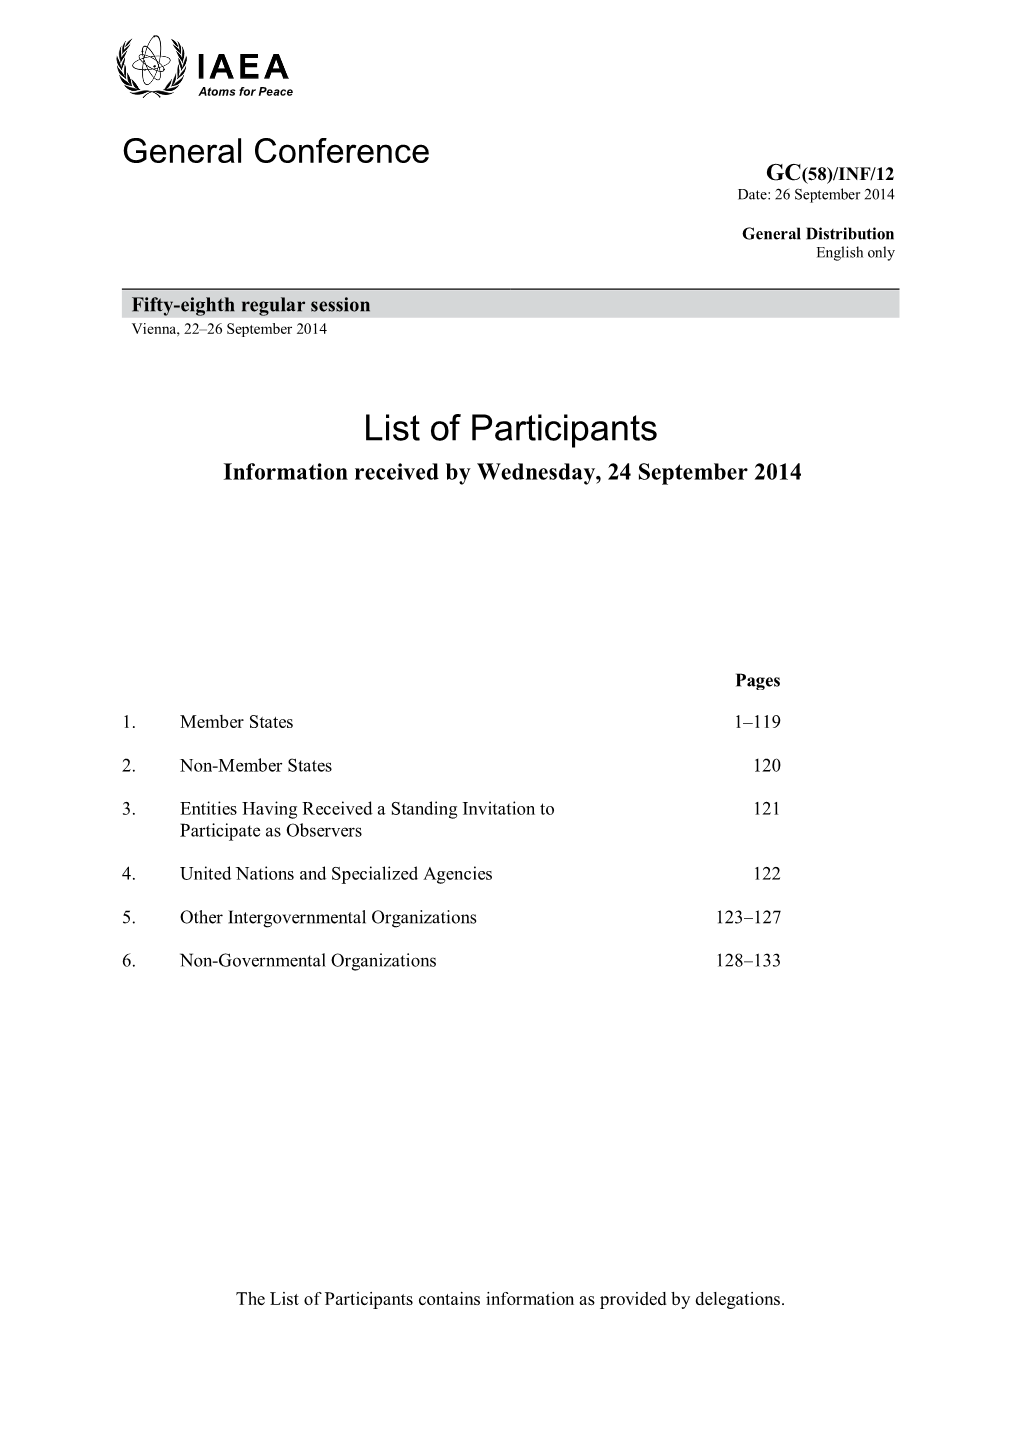 List of Participants Information Received by Wednesday, 24 September 2014